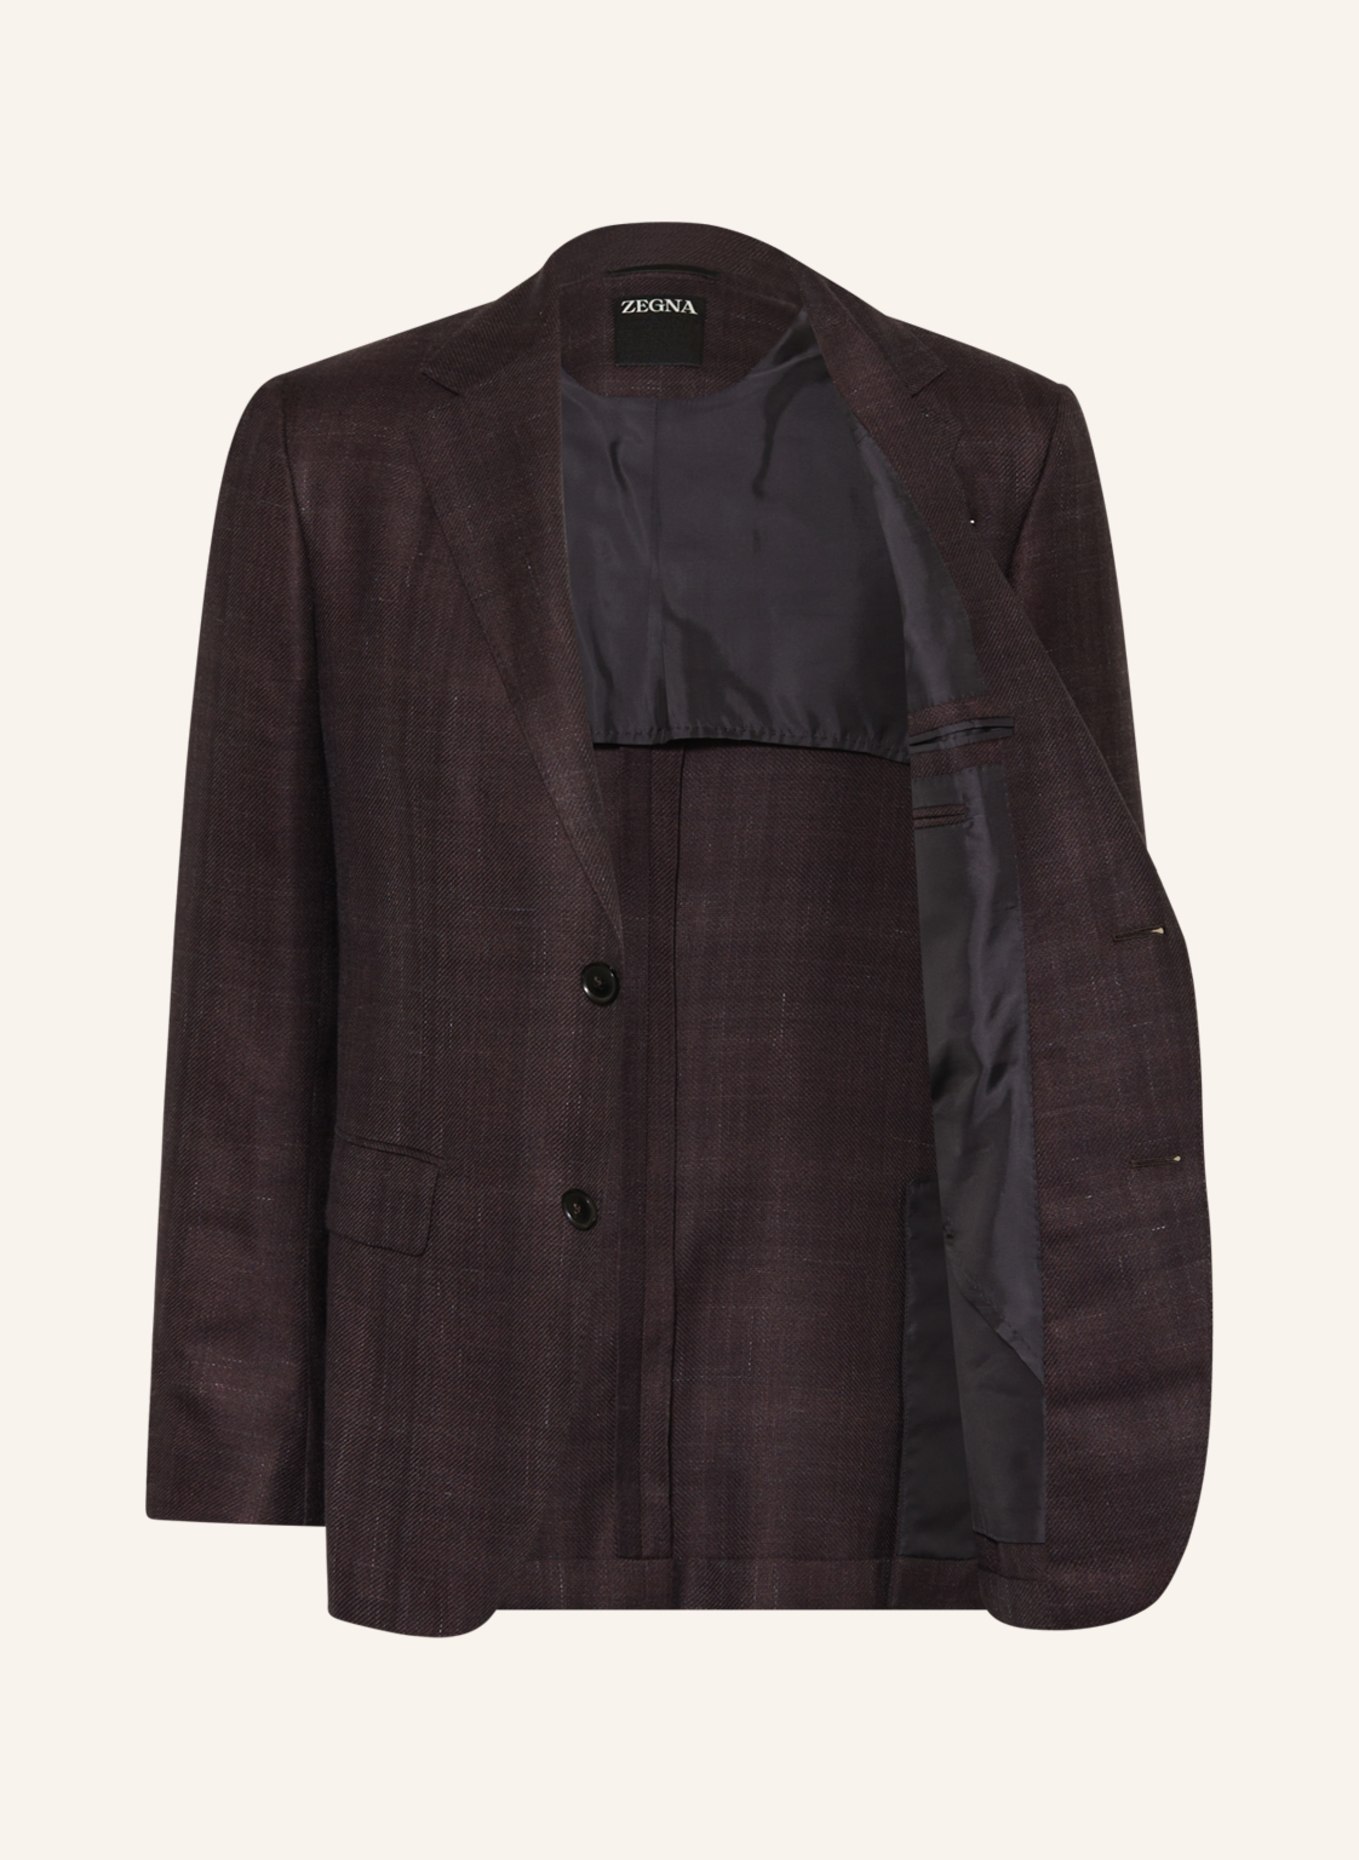 ZEGNA Tailored jacket extra slim fit with cashmere, Color: DARK RED (Image 4)